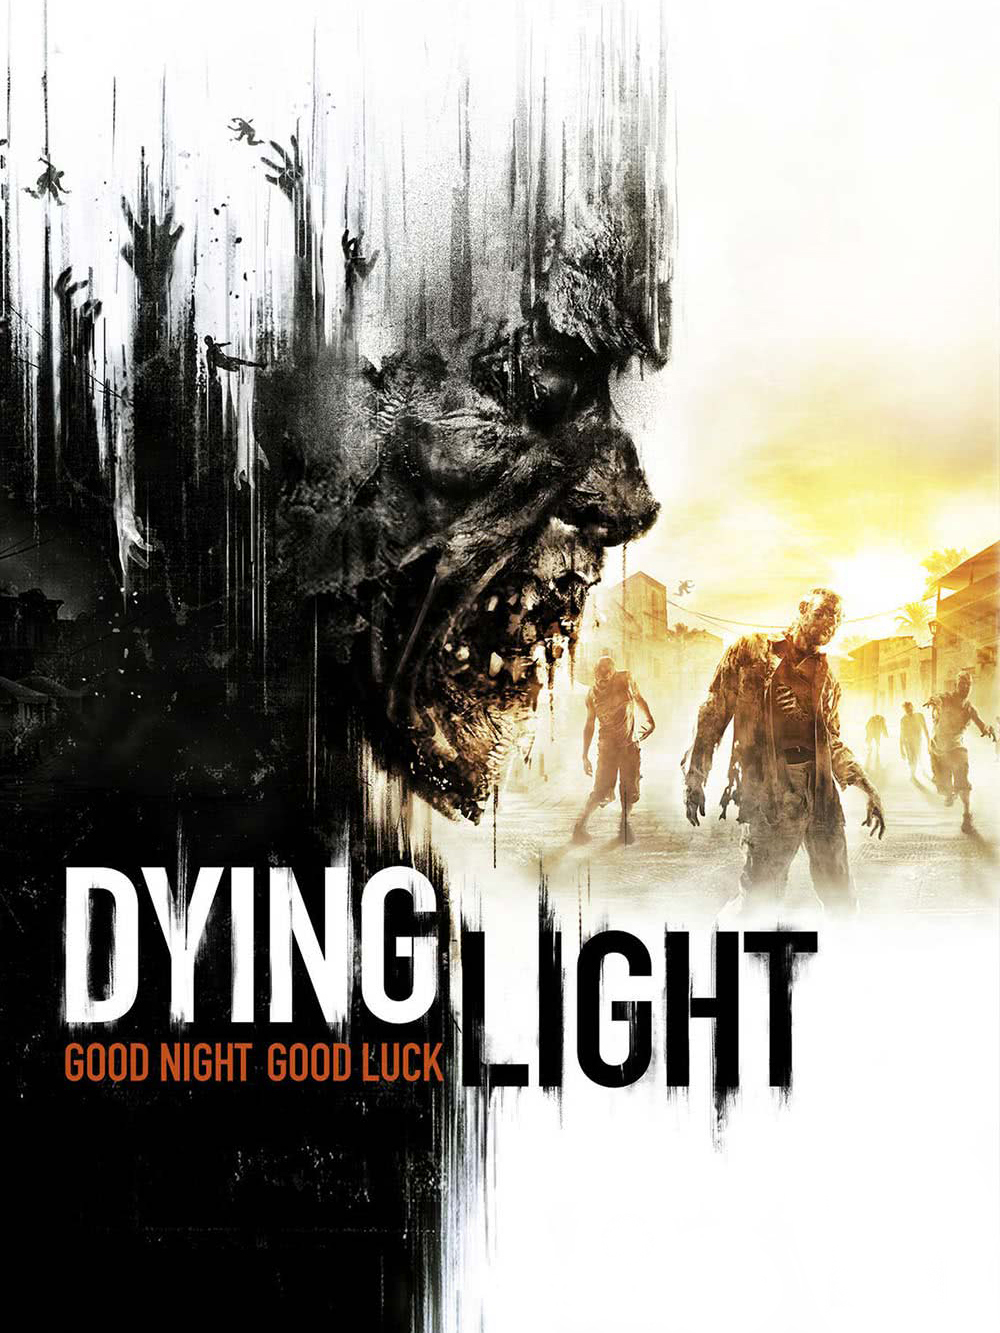 Dying Light: Definitive Edition Steam CD Key